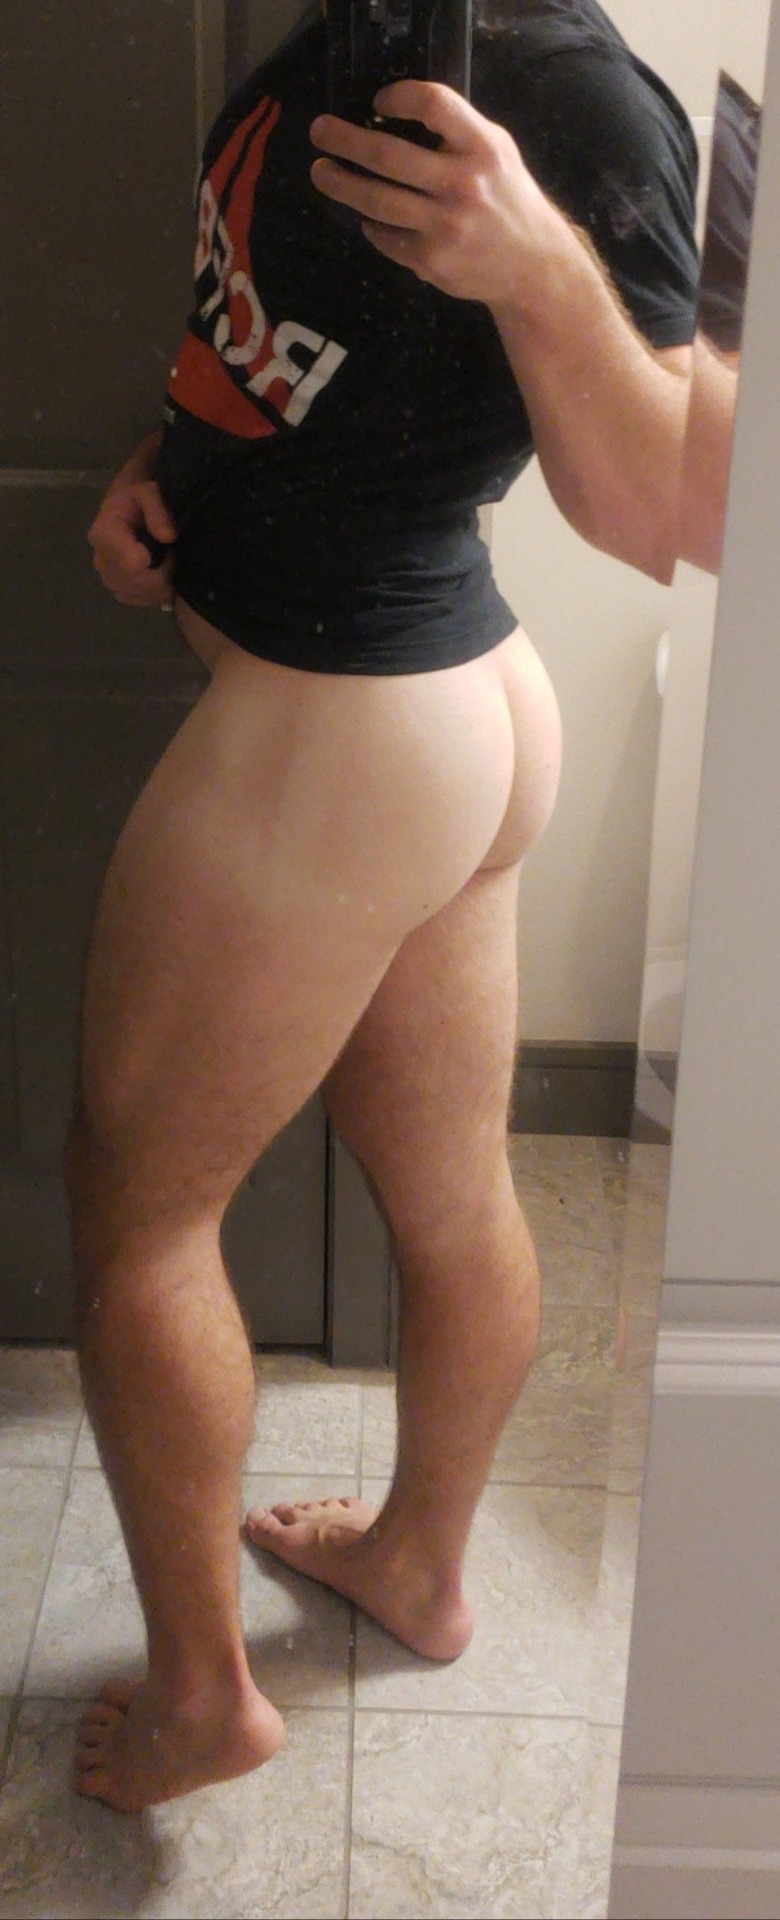 next-level-ego:  Feeling my butt today for once